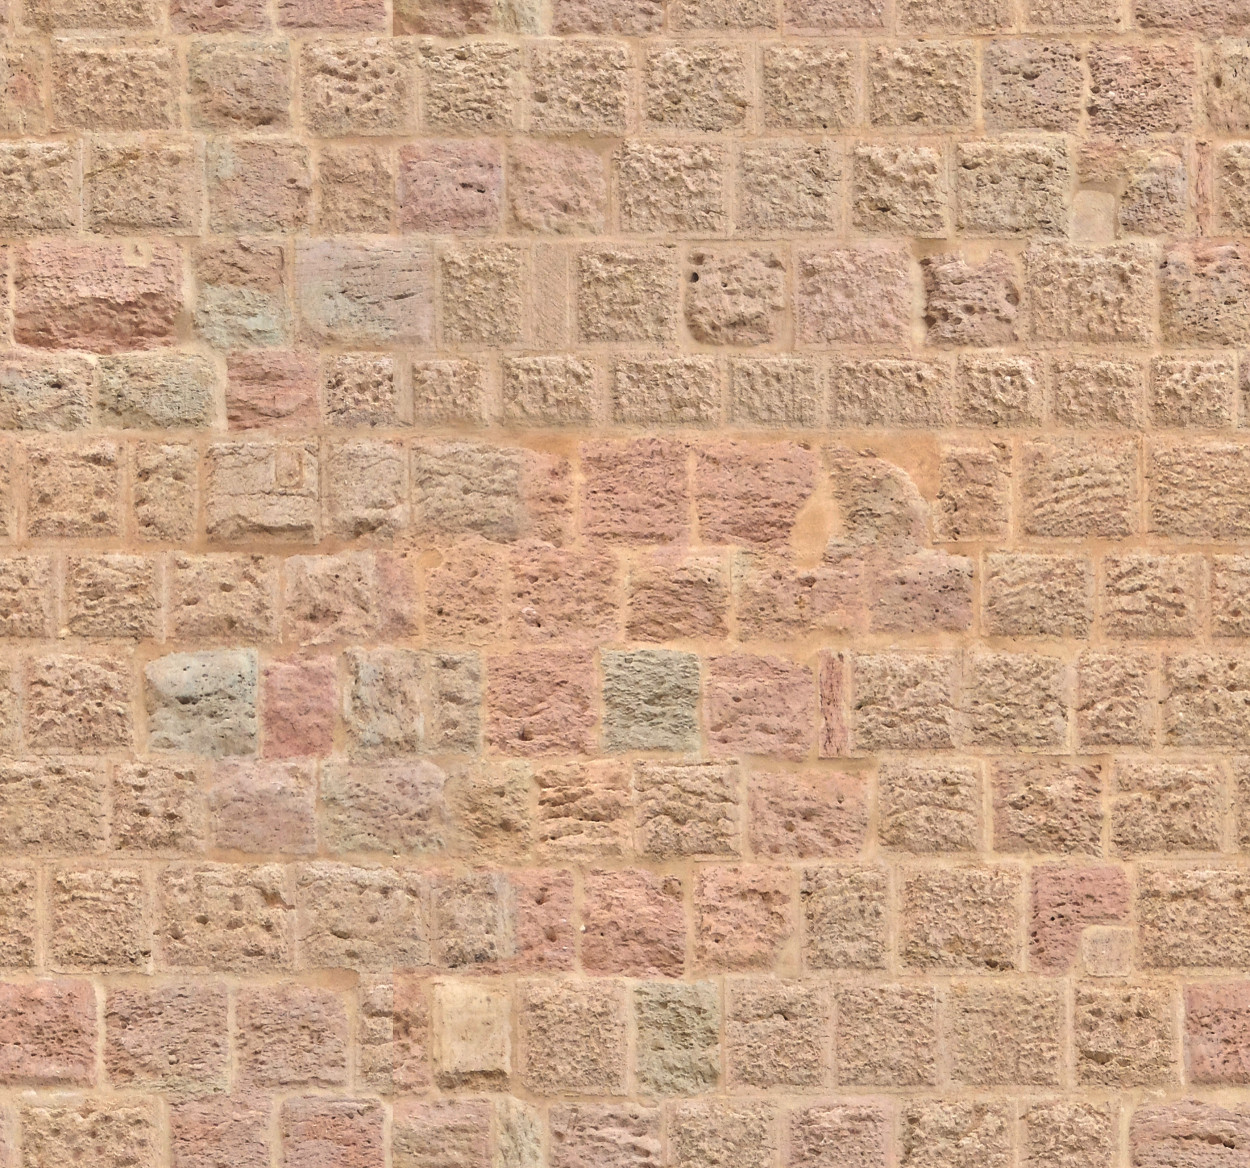 A seamless old stone masonry wall texture for use in architectural drawings and 3D models